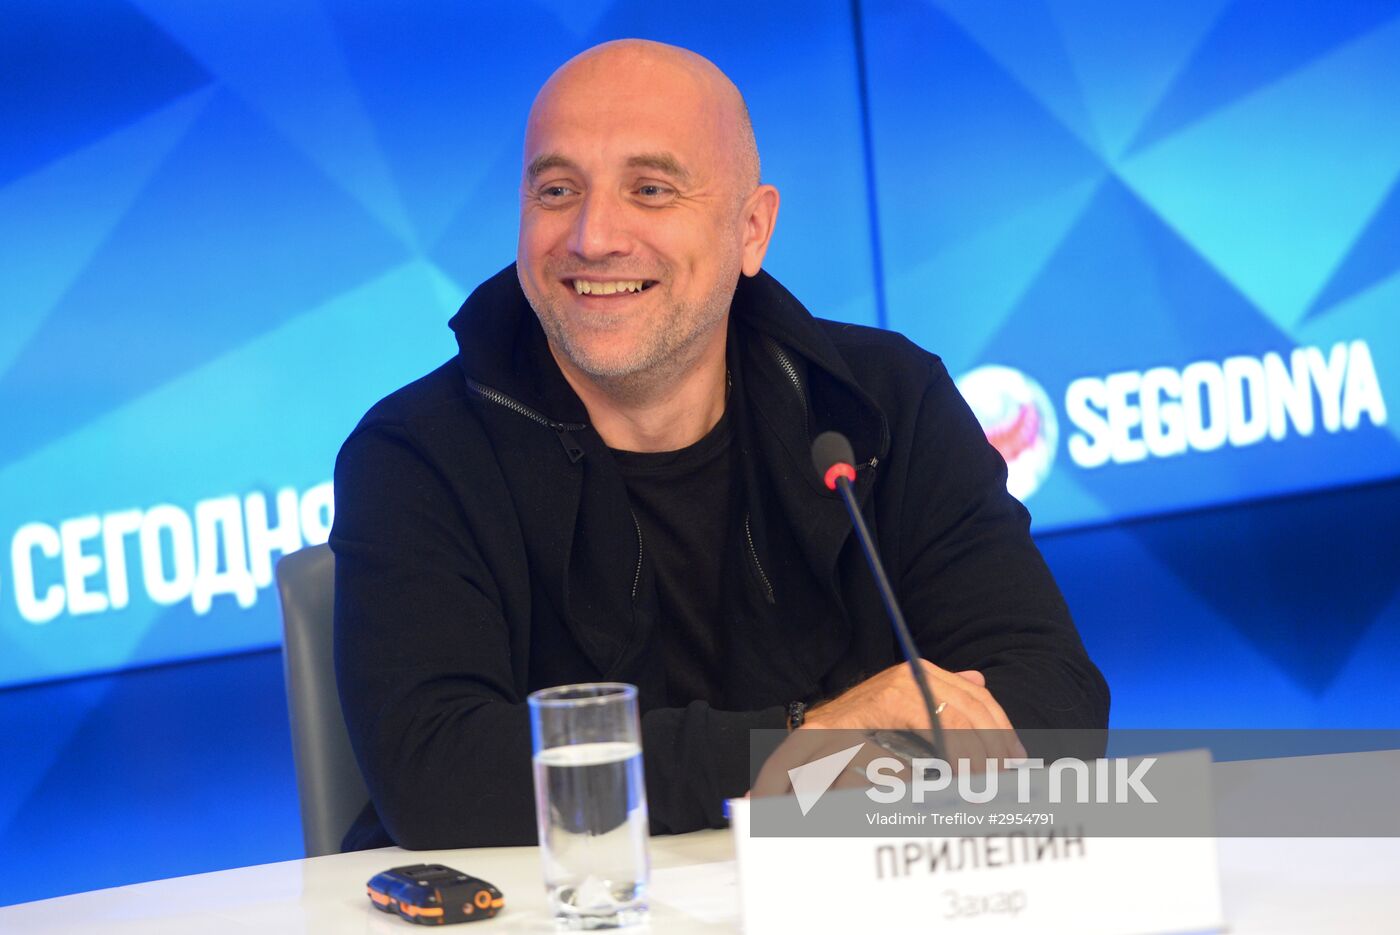 News conference by writer Zakhar Prilepin